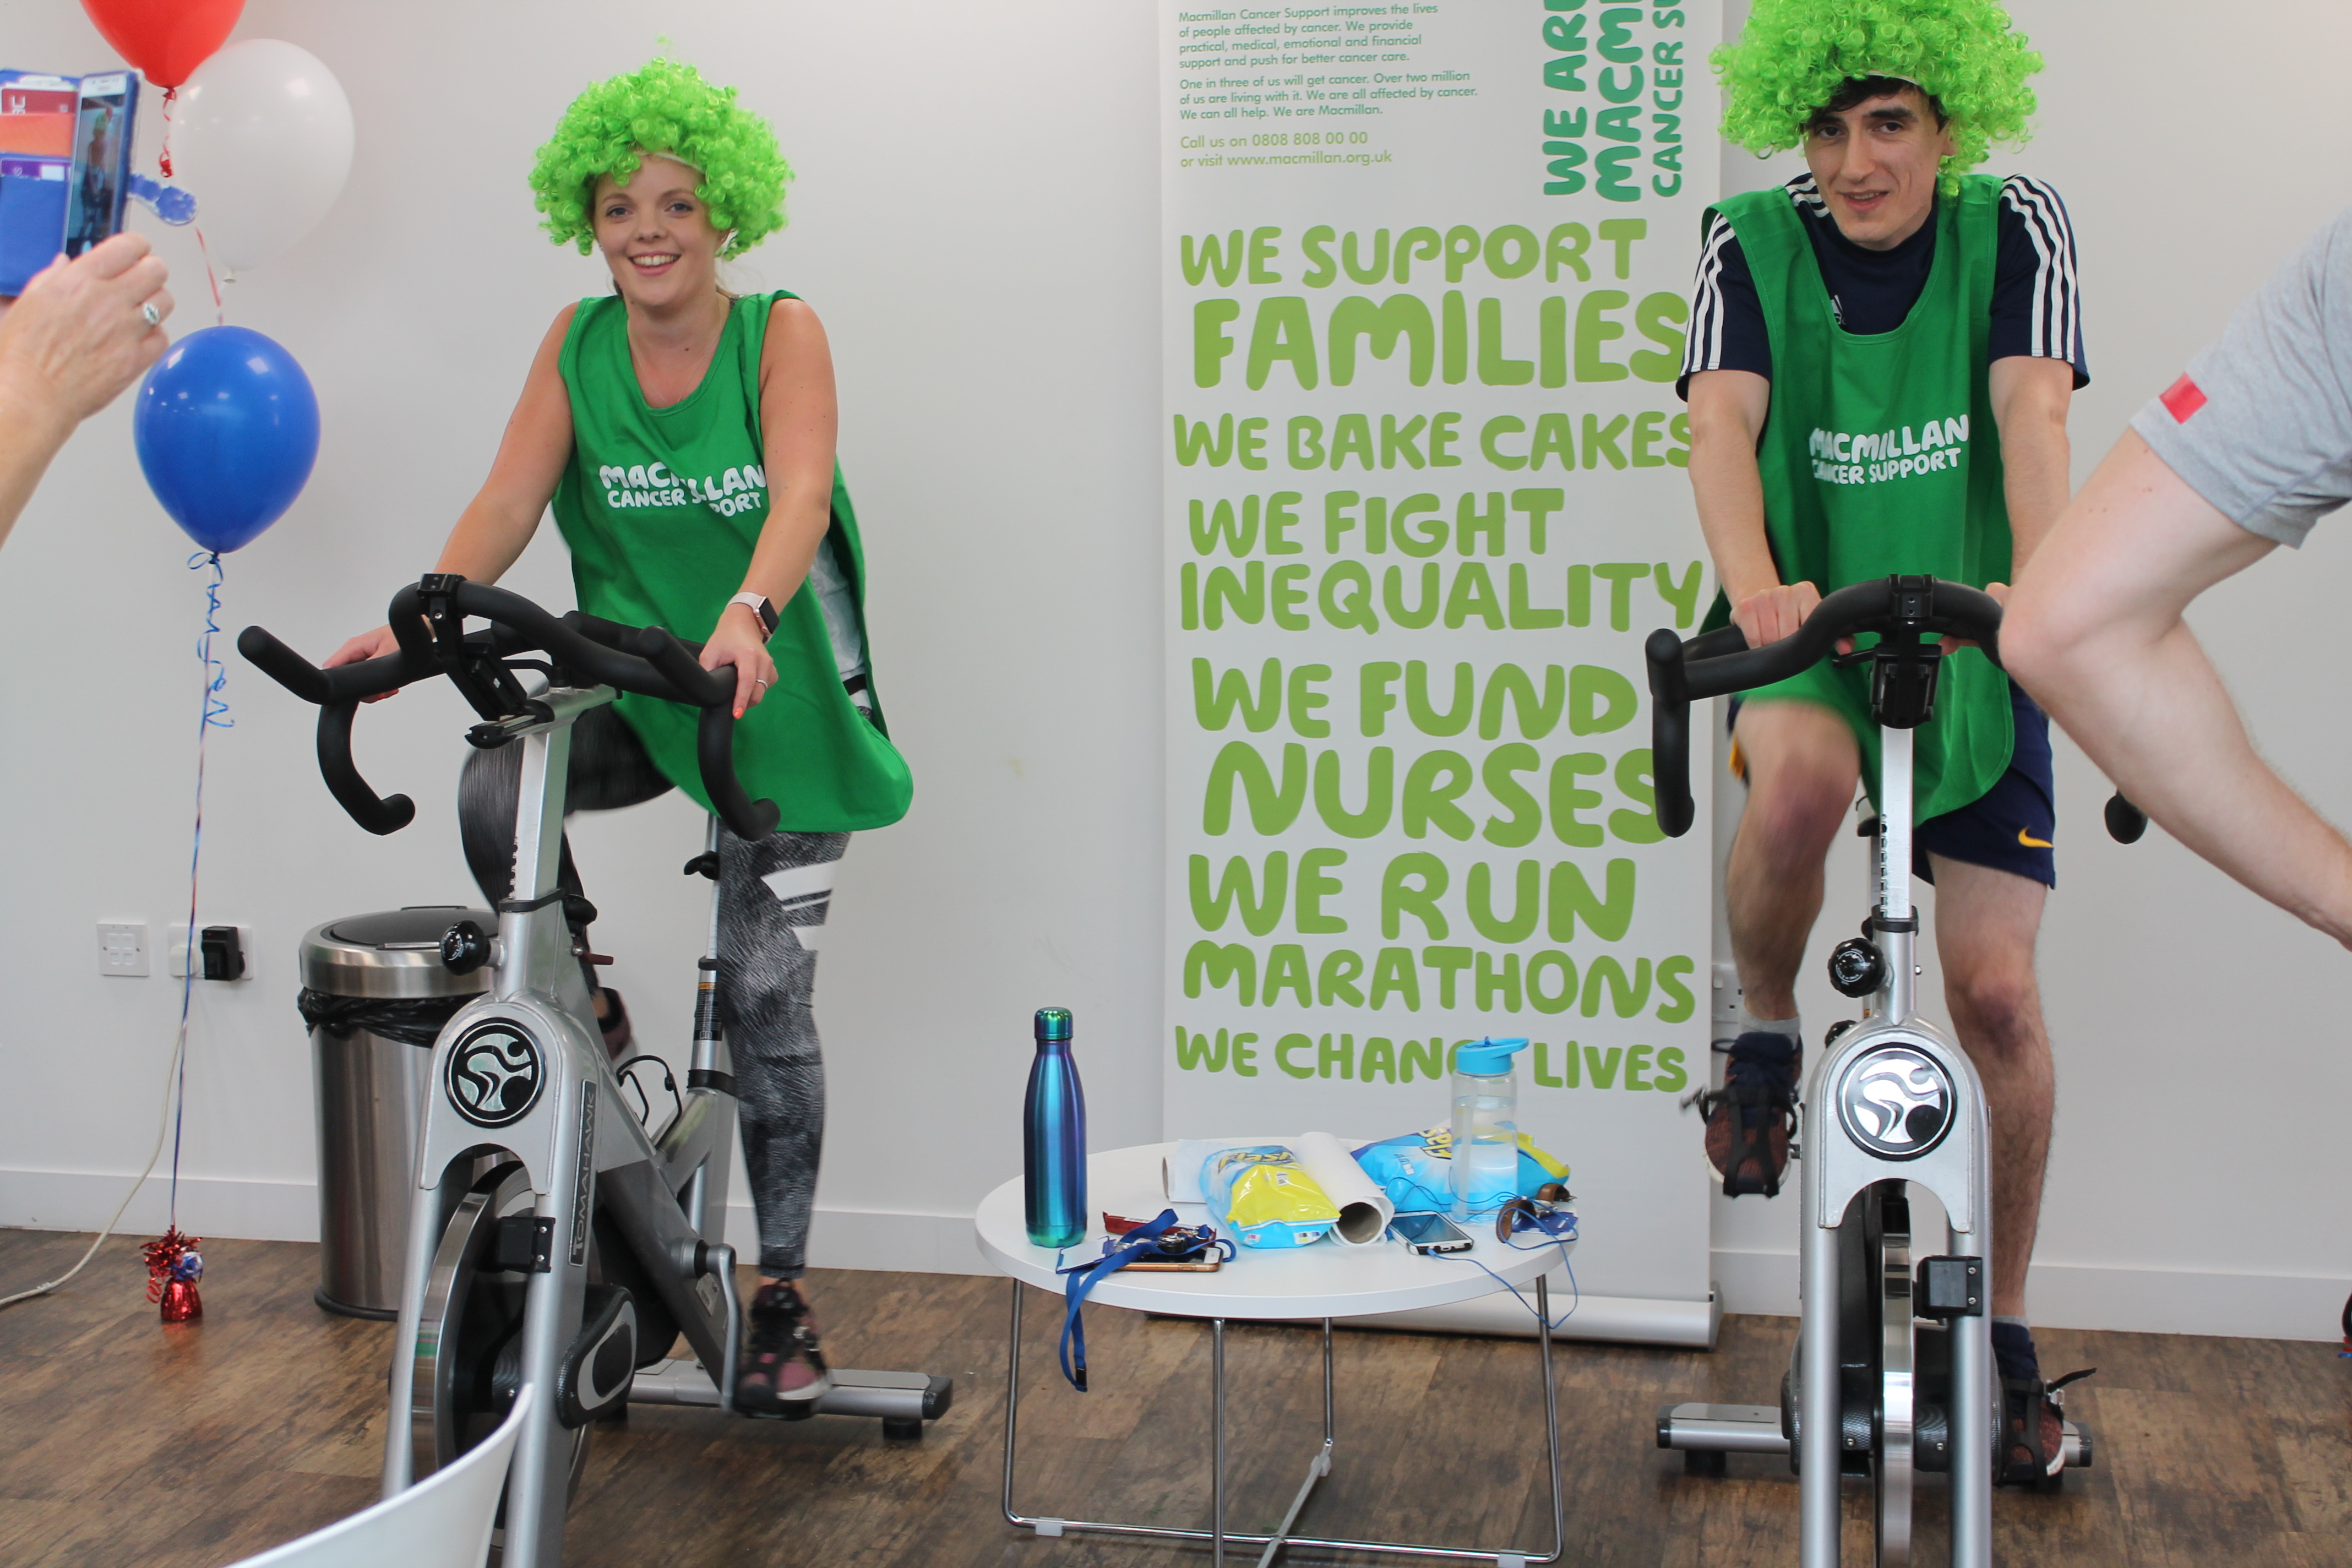 CliniMed staff riding on the training bikes whilst wearing green wigs